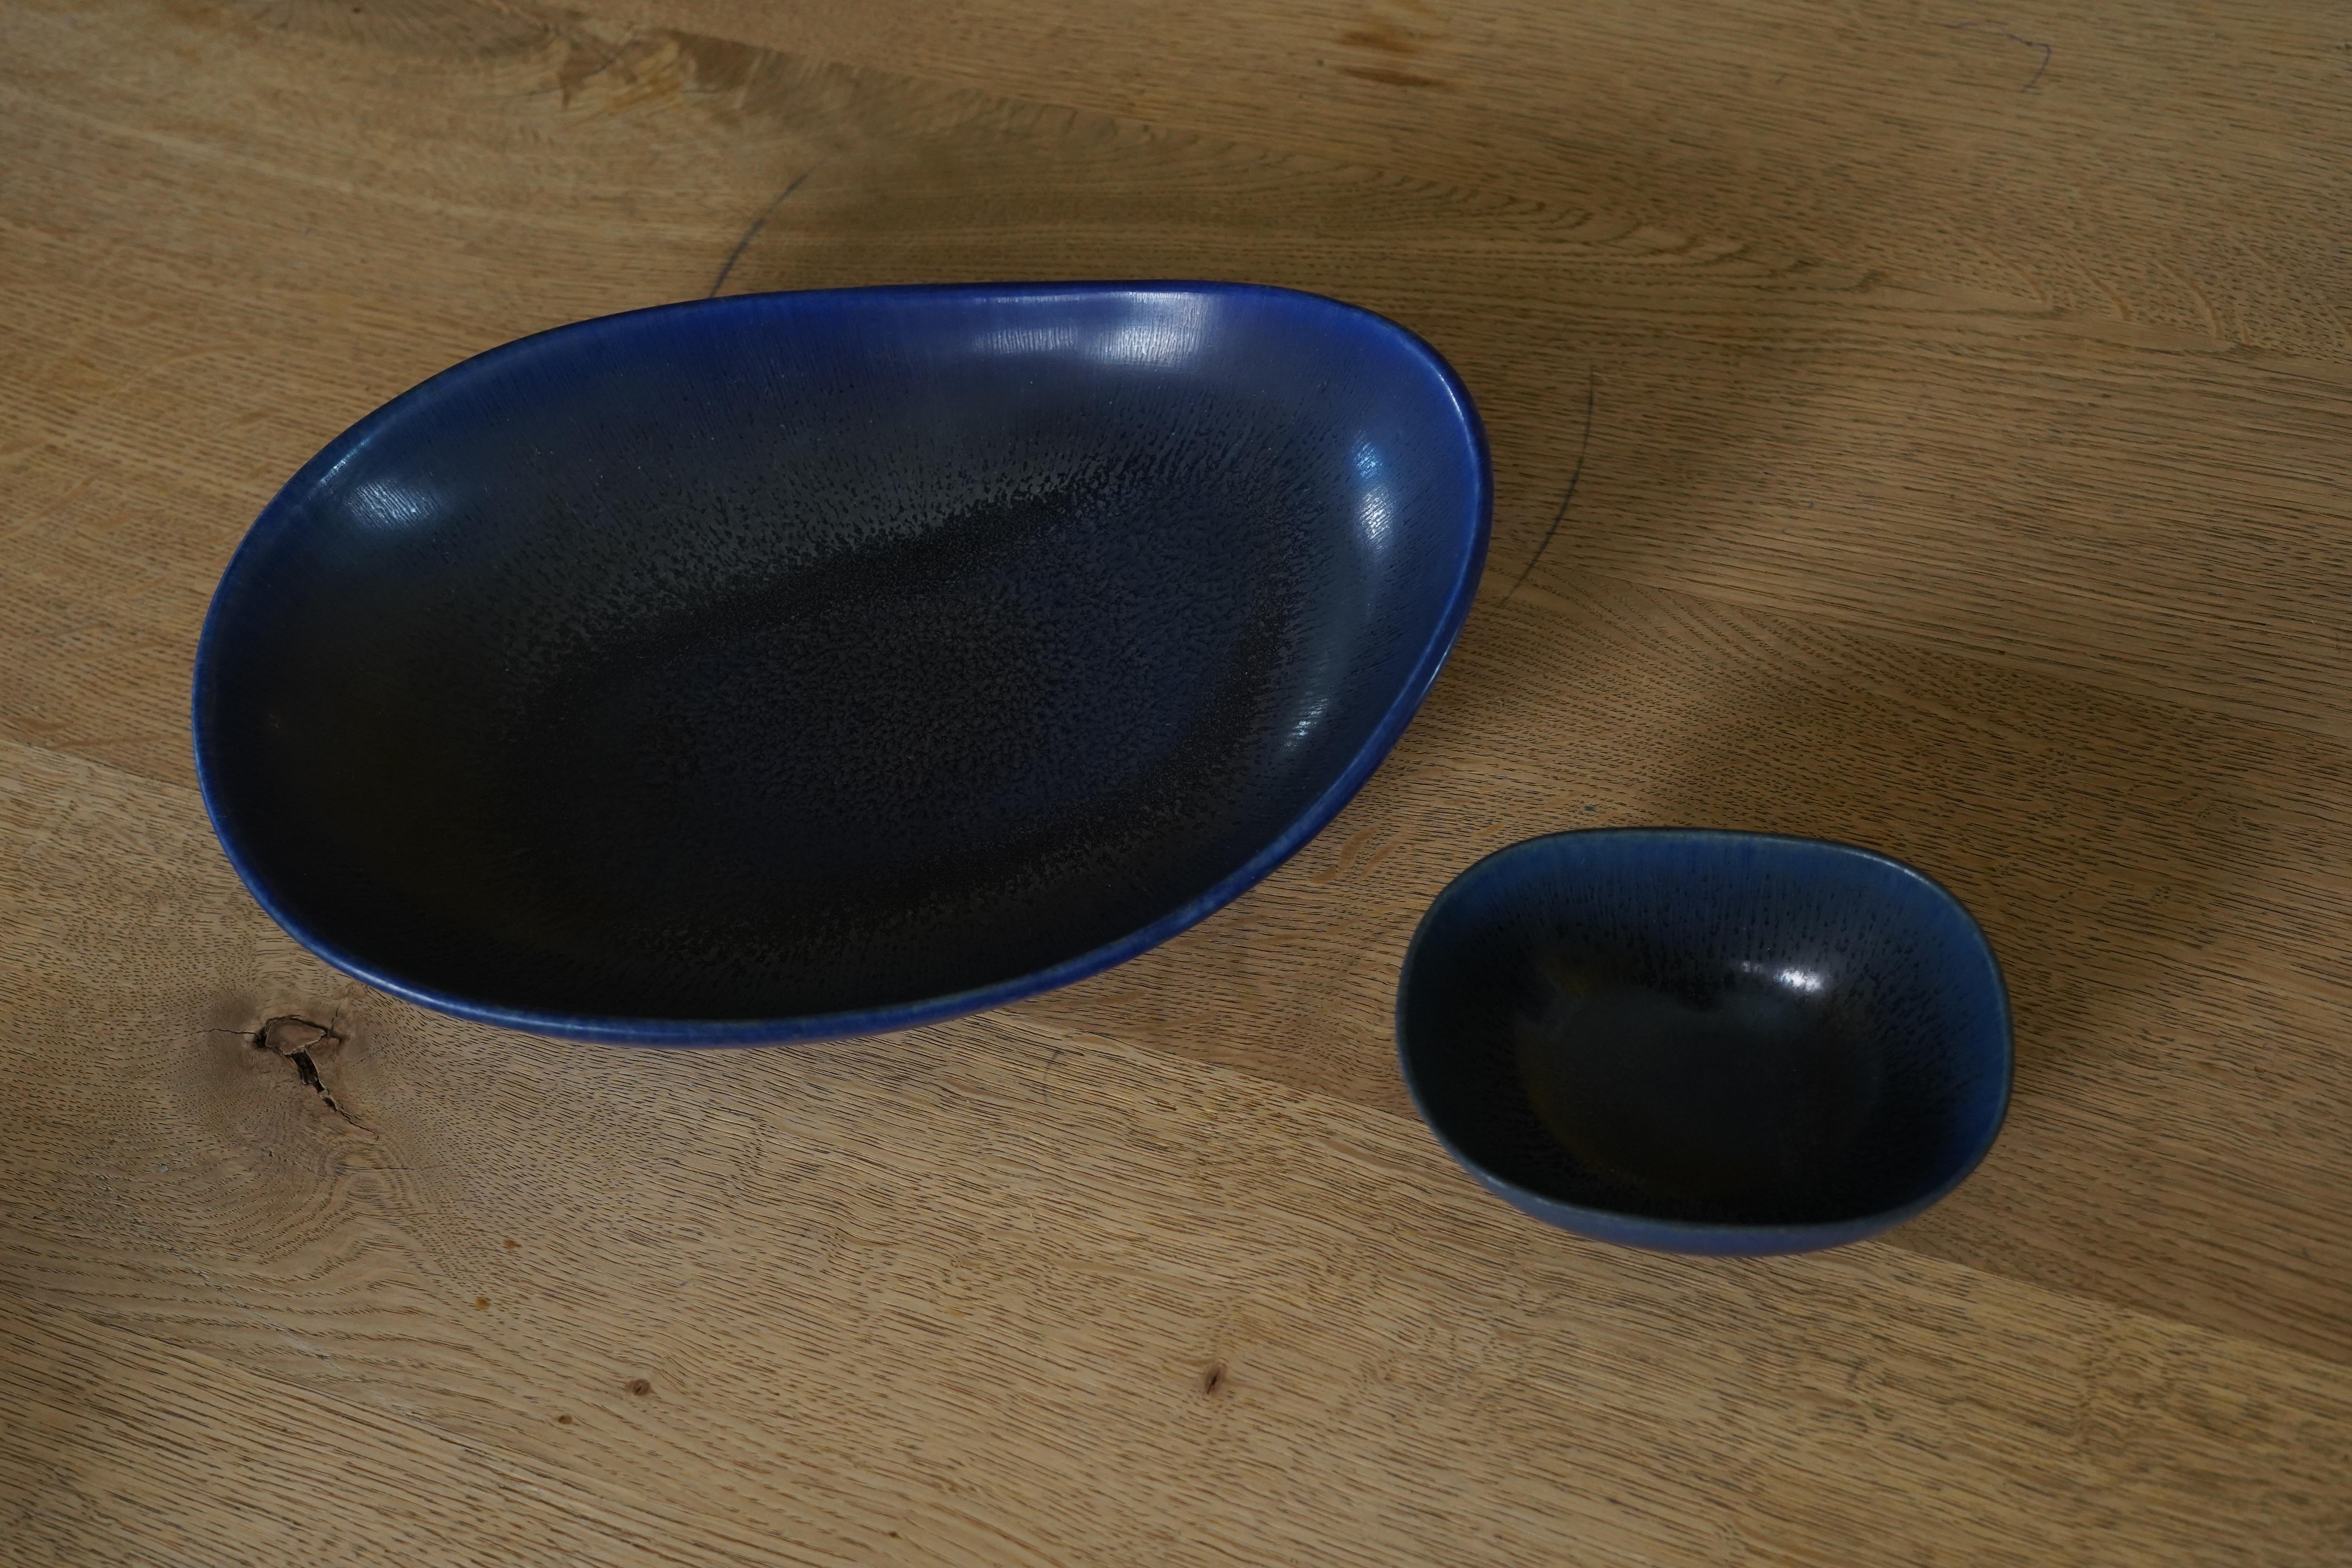 Carl-Harry Stålhane for Rörstrand  dark blue ceramic trays Sweden, 1960.
Set of tray and bowl large flat dark blue ceramic tray with rounded sides and a smaller matching tray.
Large tray 11